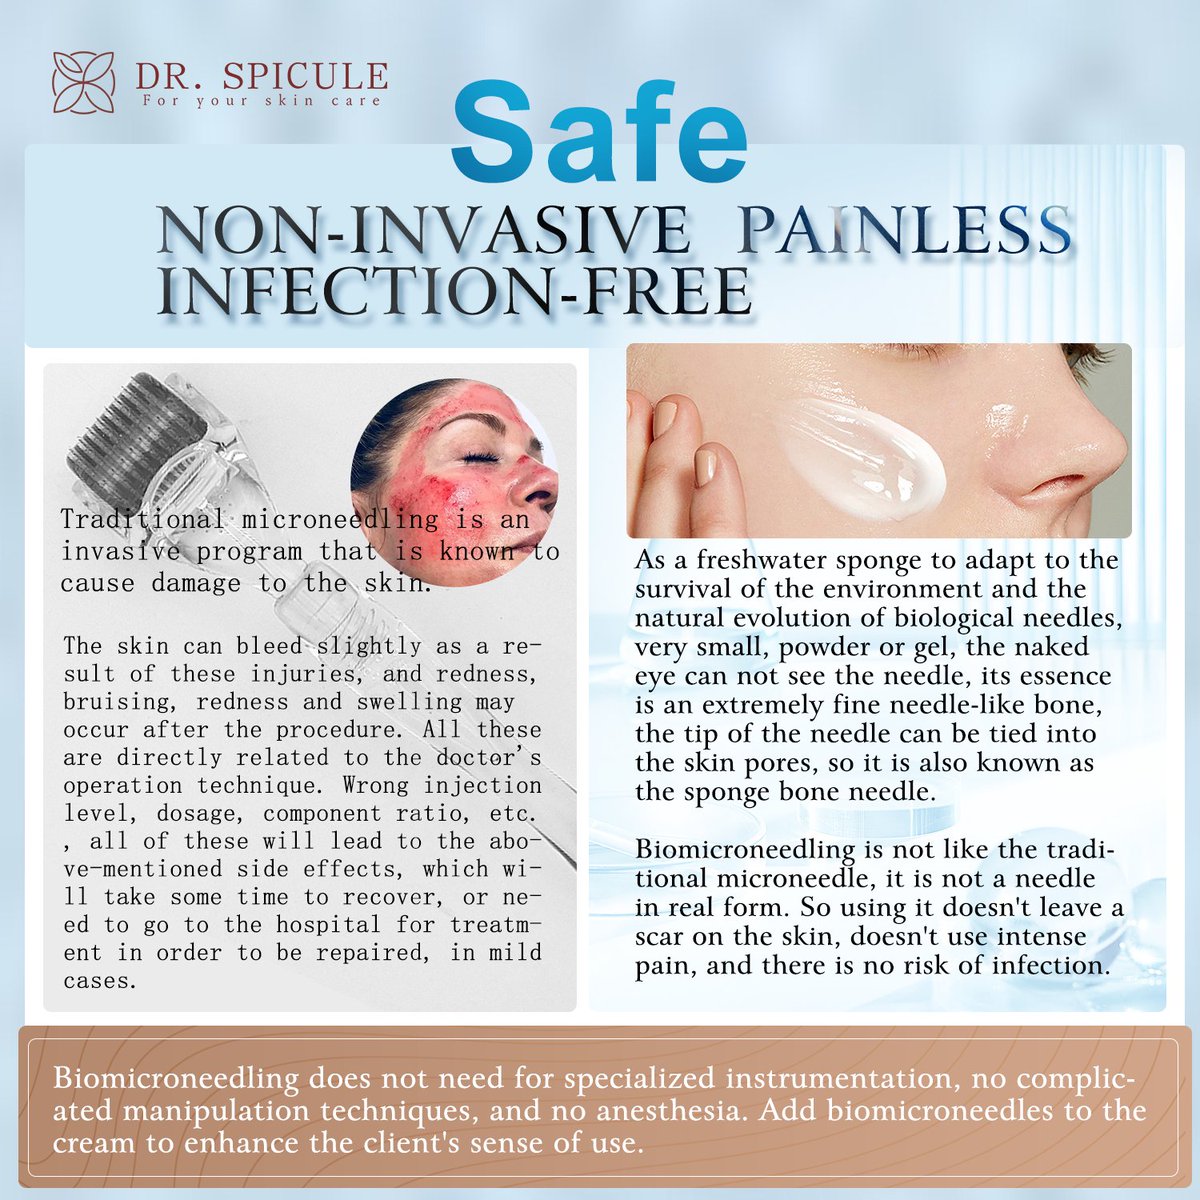 Why is DR. SPICULE safe?
#NONINVASIVE 
#PAINLESS
#INFECTIONFREE
#Biomicroneedling does not need for specialized instrumentation, no complicated manipulation techniques, and no anesthesia. Add #biomicroneedles to the cream to enhance the client's sense of use.
👇 👇 👇